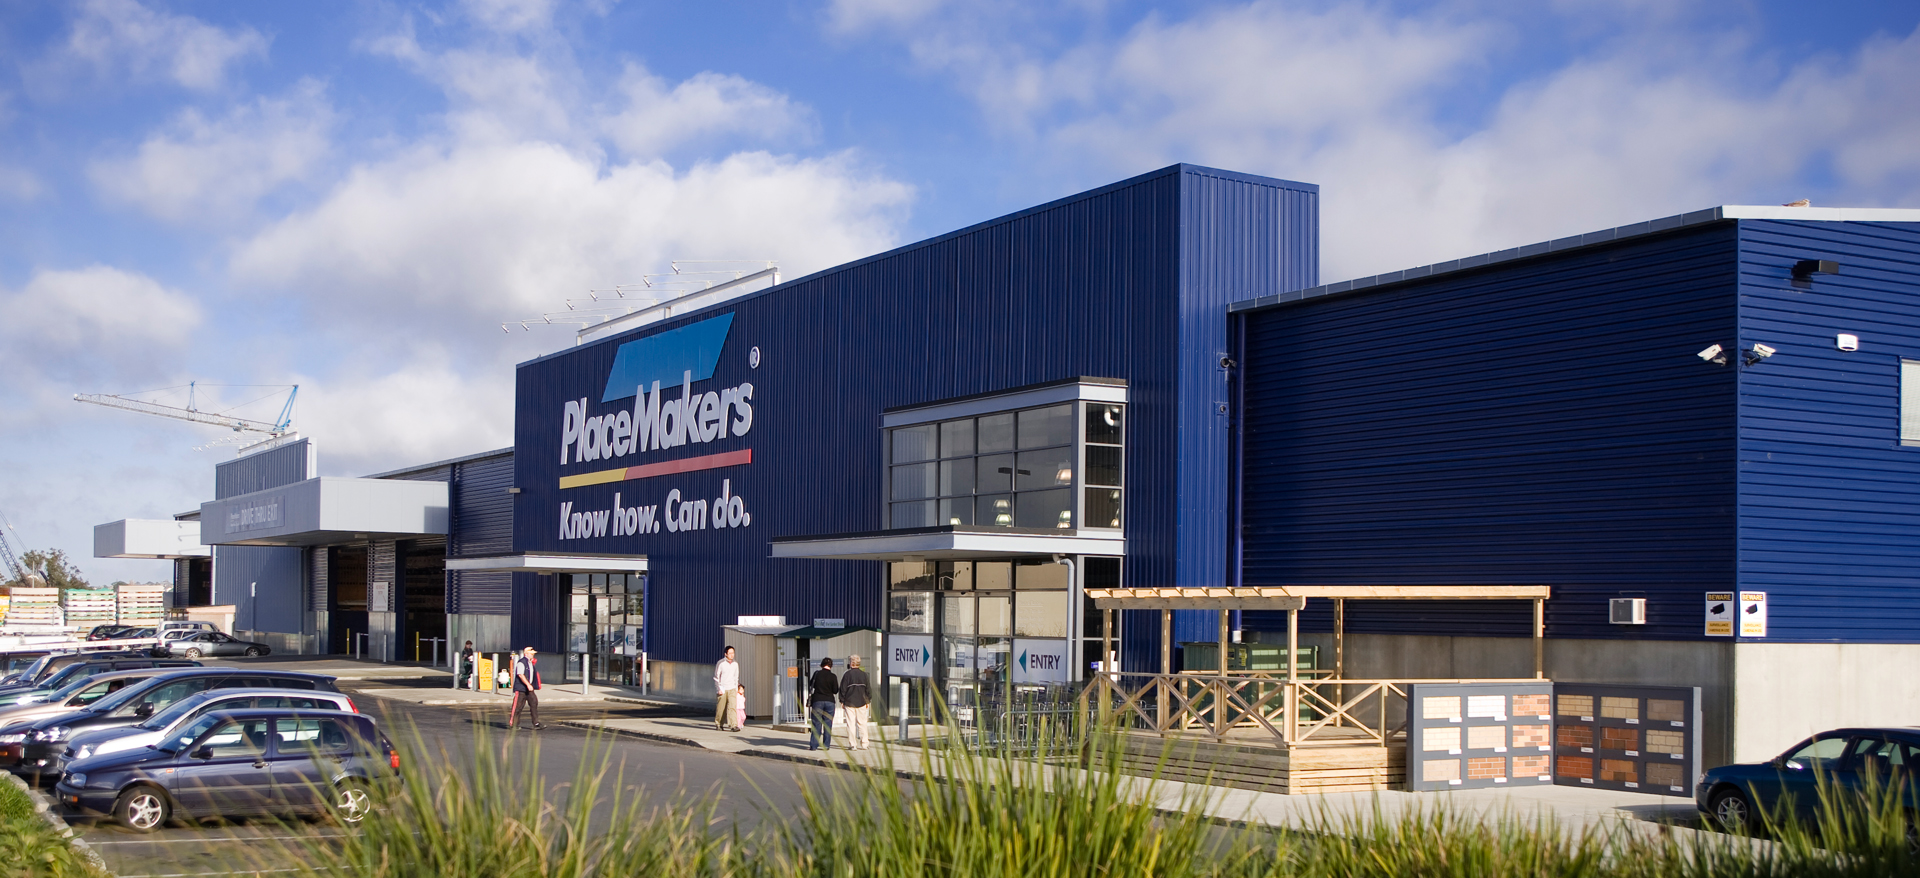 Placemakers Stores, New Zealand Nationwide